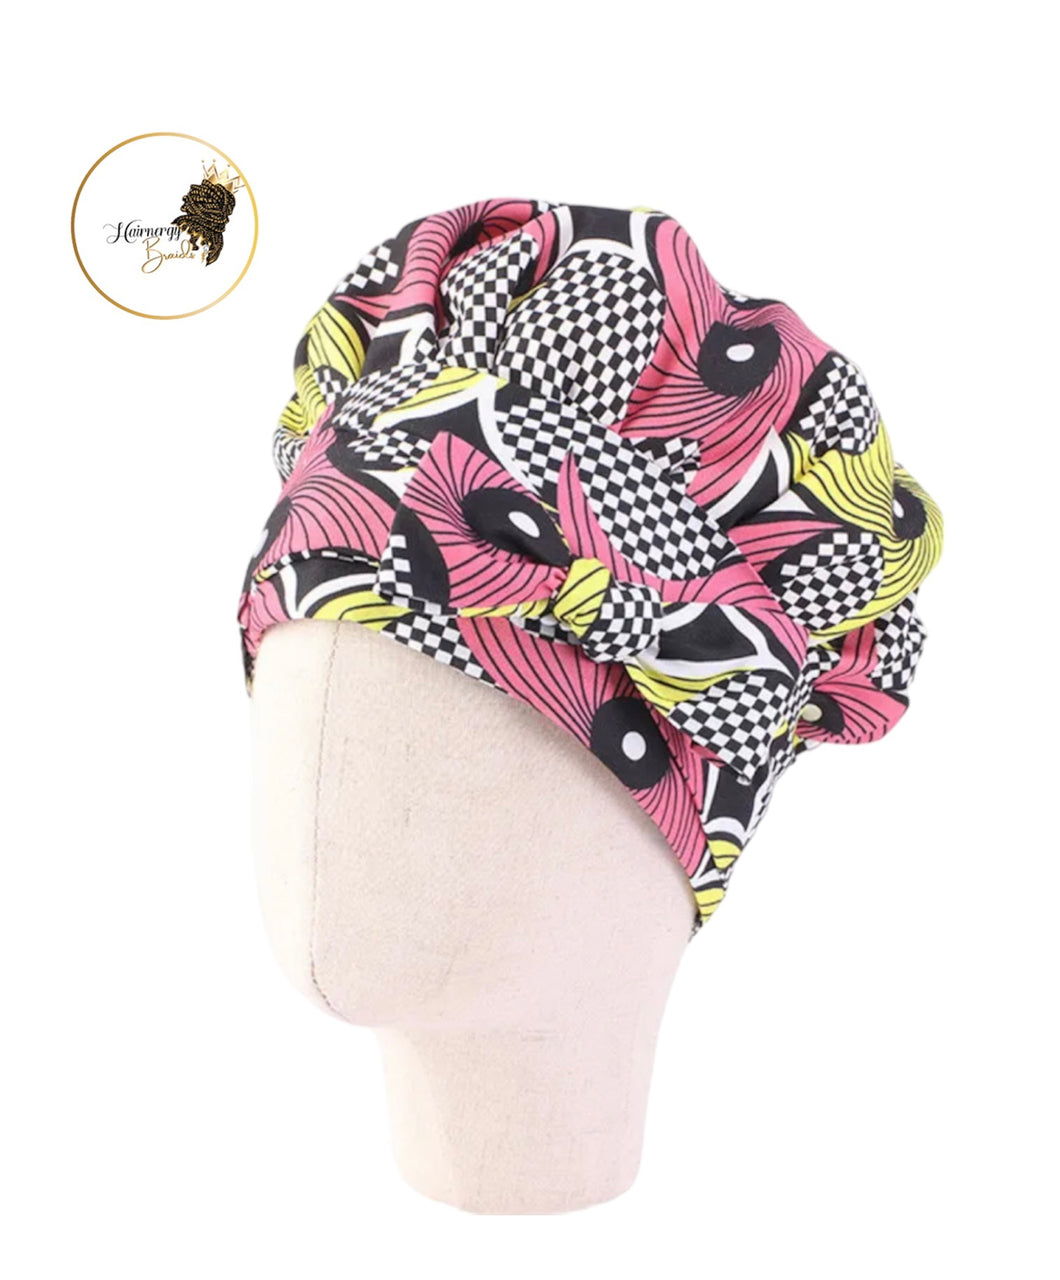 Kids Satin Hair Bonnet Sleep Cap with elastic and extra long tie band